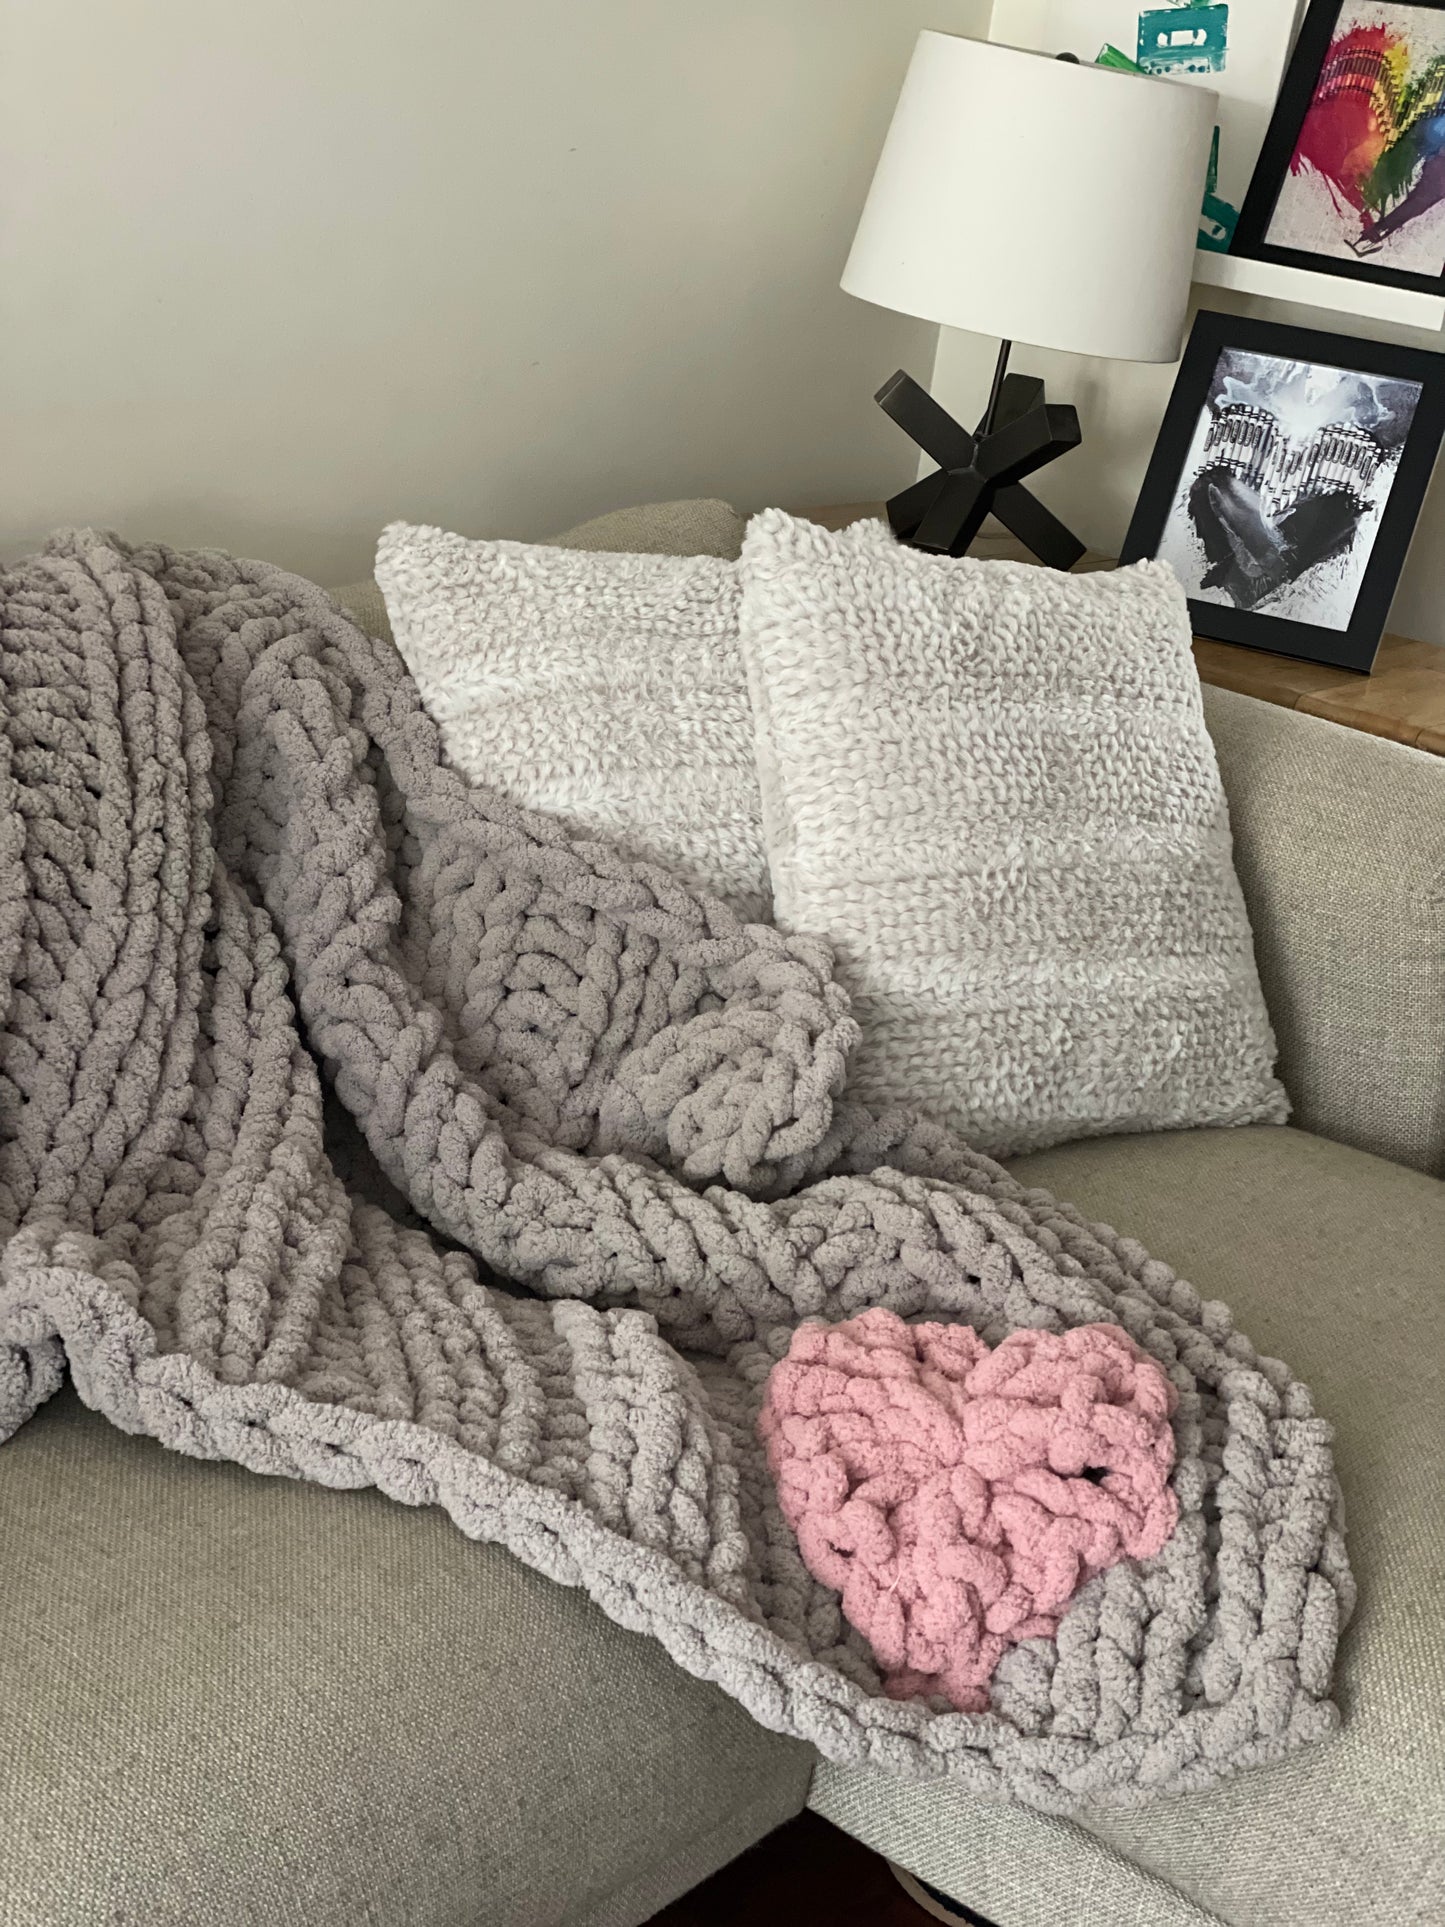 *PRE-ORDER - Healing Hand, Chunky Knit Blanket Light Grey with Soft Pink Heart - double sided heart design